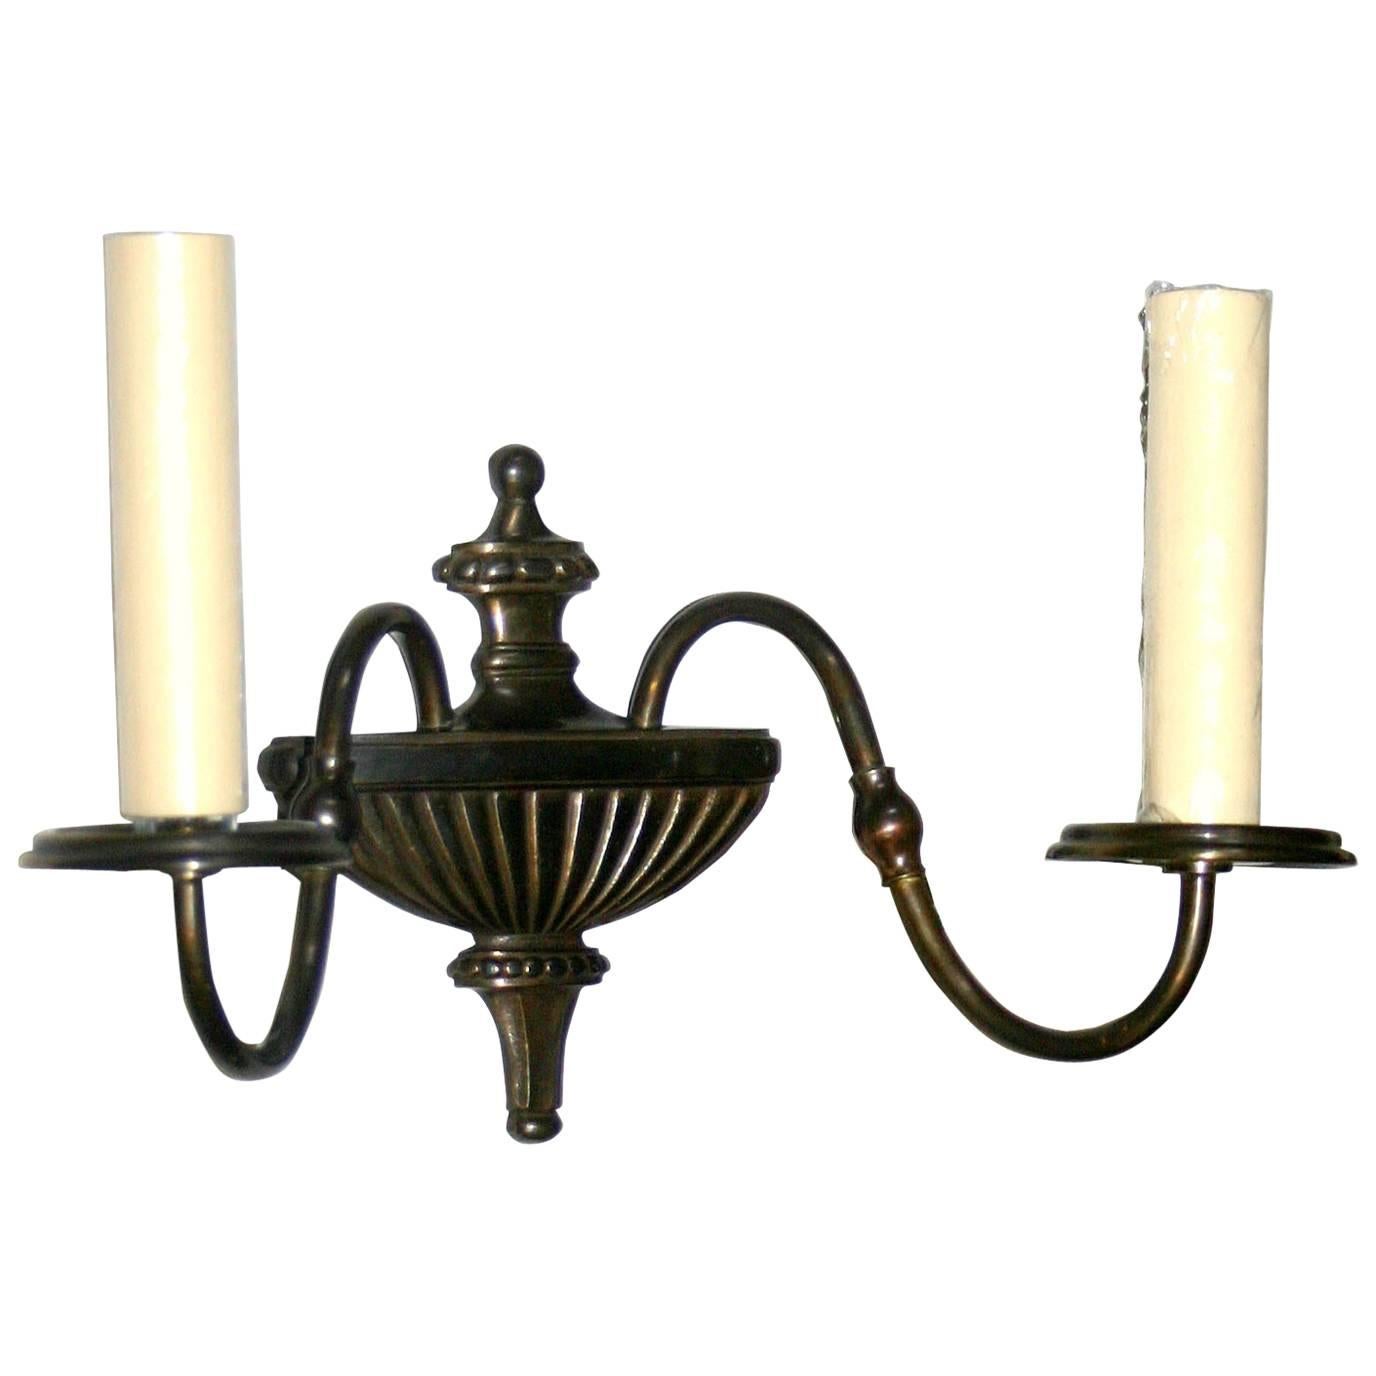 Pair of French circa 1920's Neoclassic style two-arm sconces.

Measurements
Width: 10.5